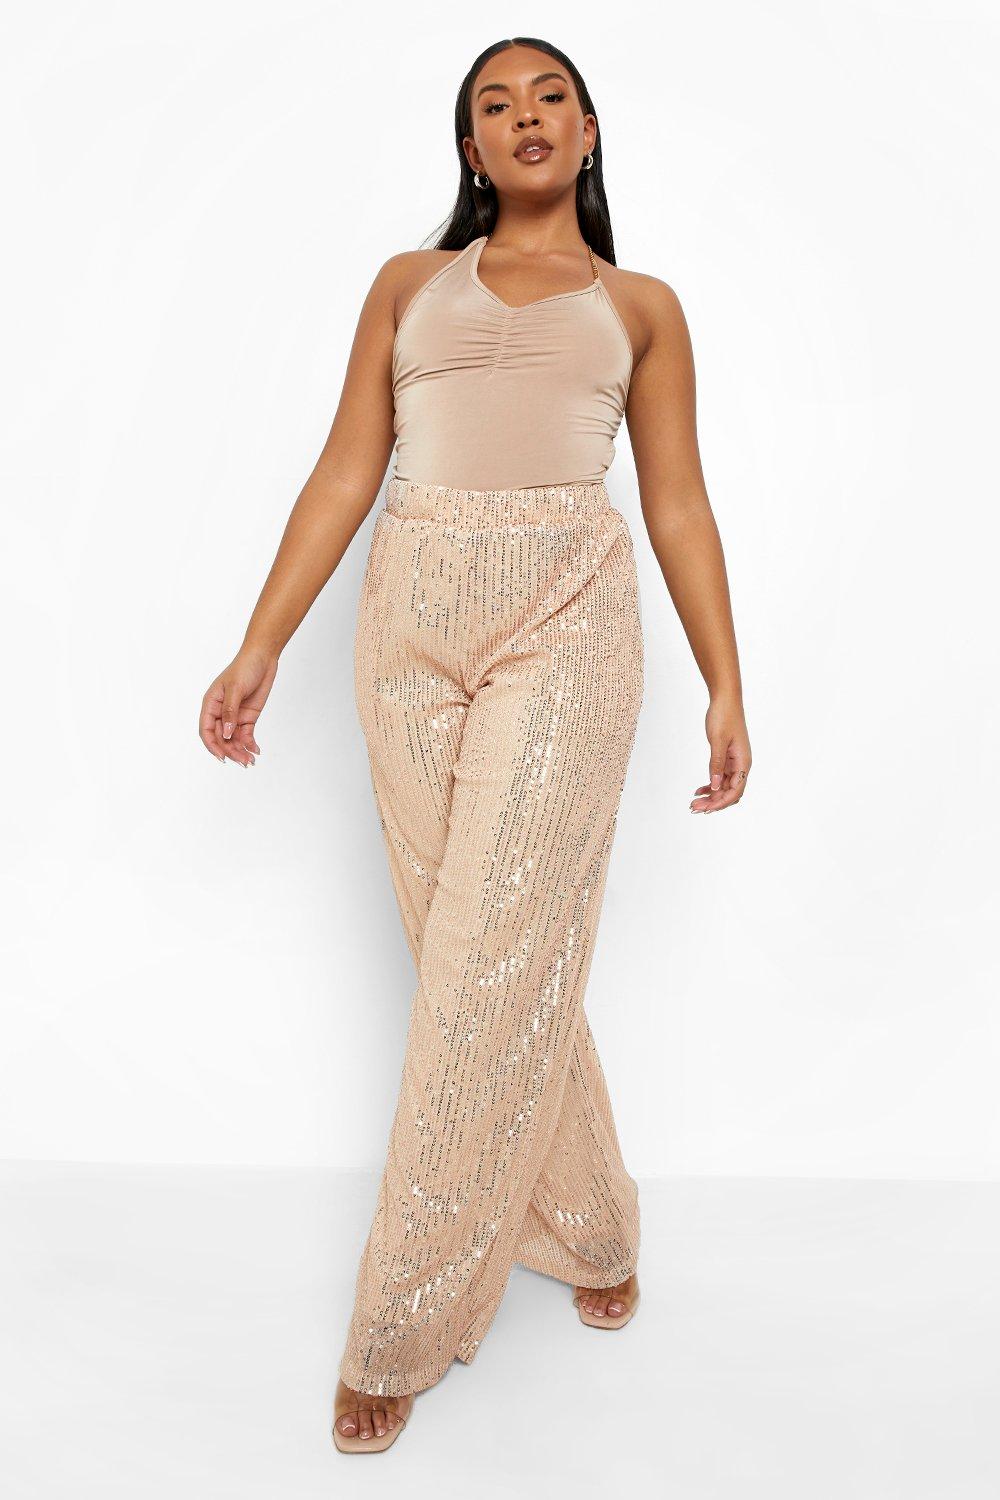 Plus Size Sequin Tailored Flared Trouser